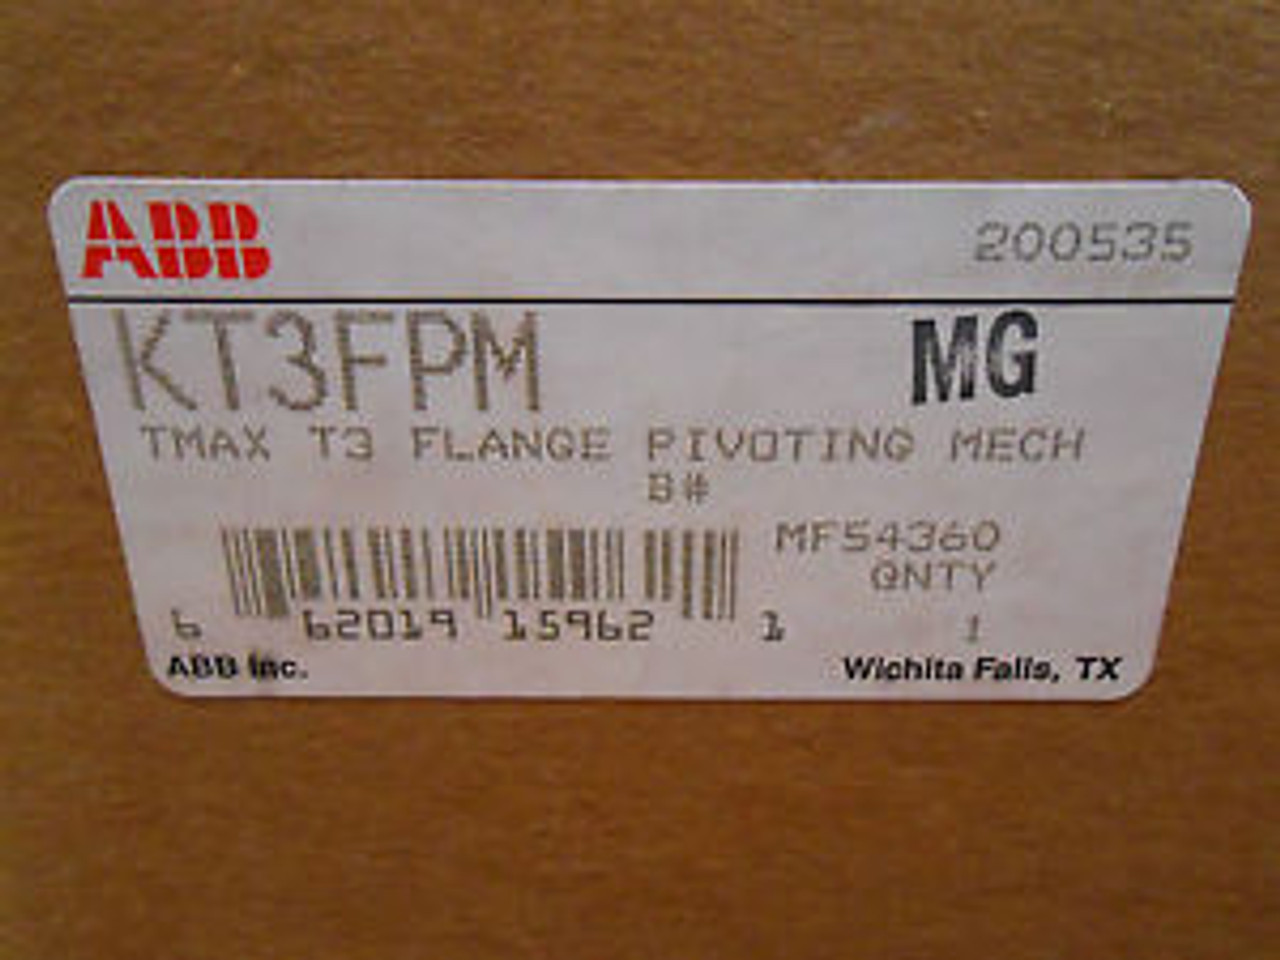 ABB KT3FPM Cable Operated Pivoting Mechanism T3 Flange for sale online 